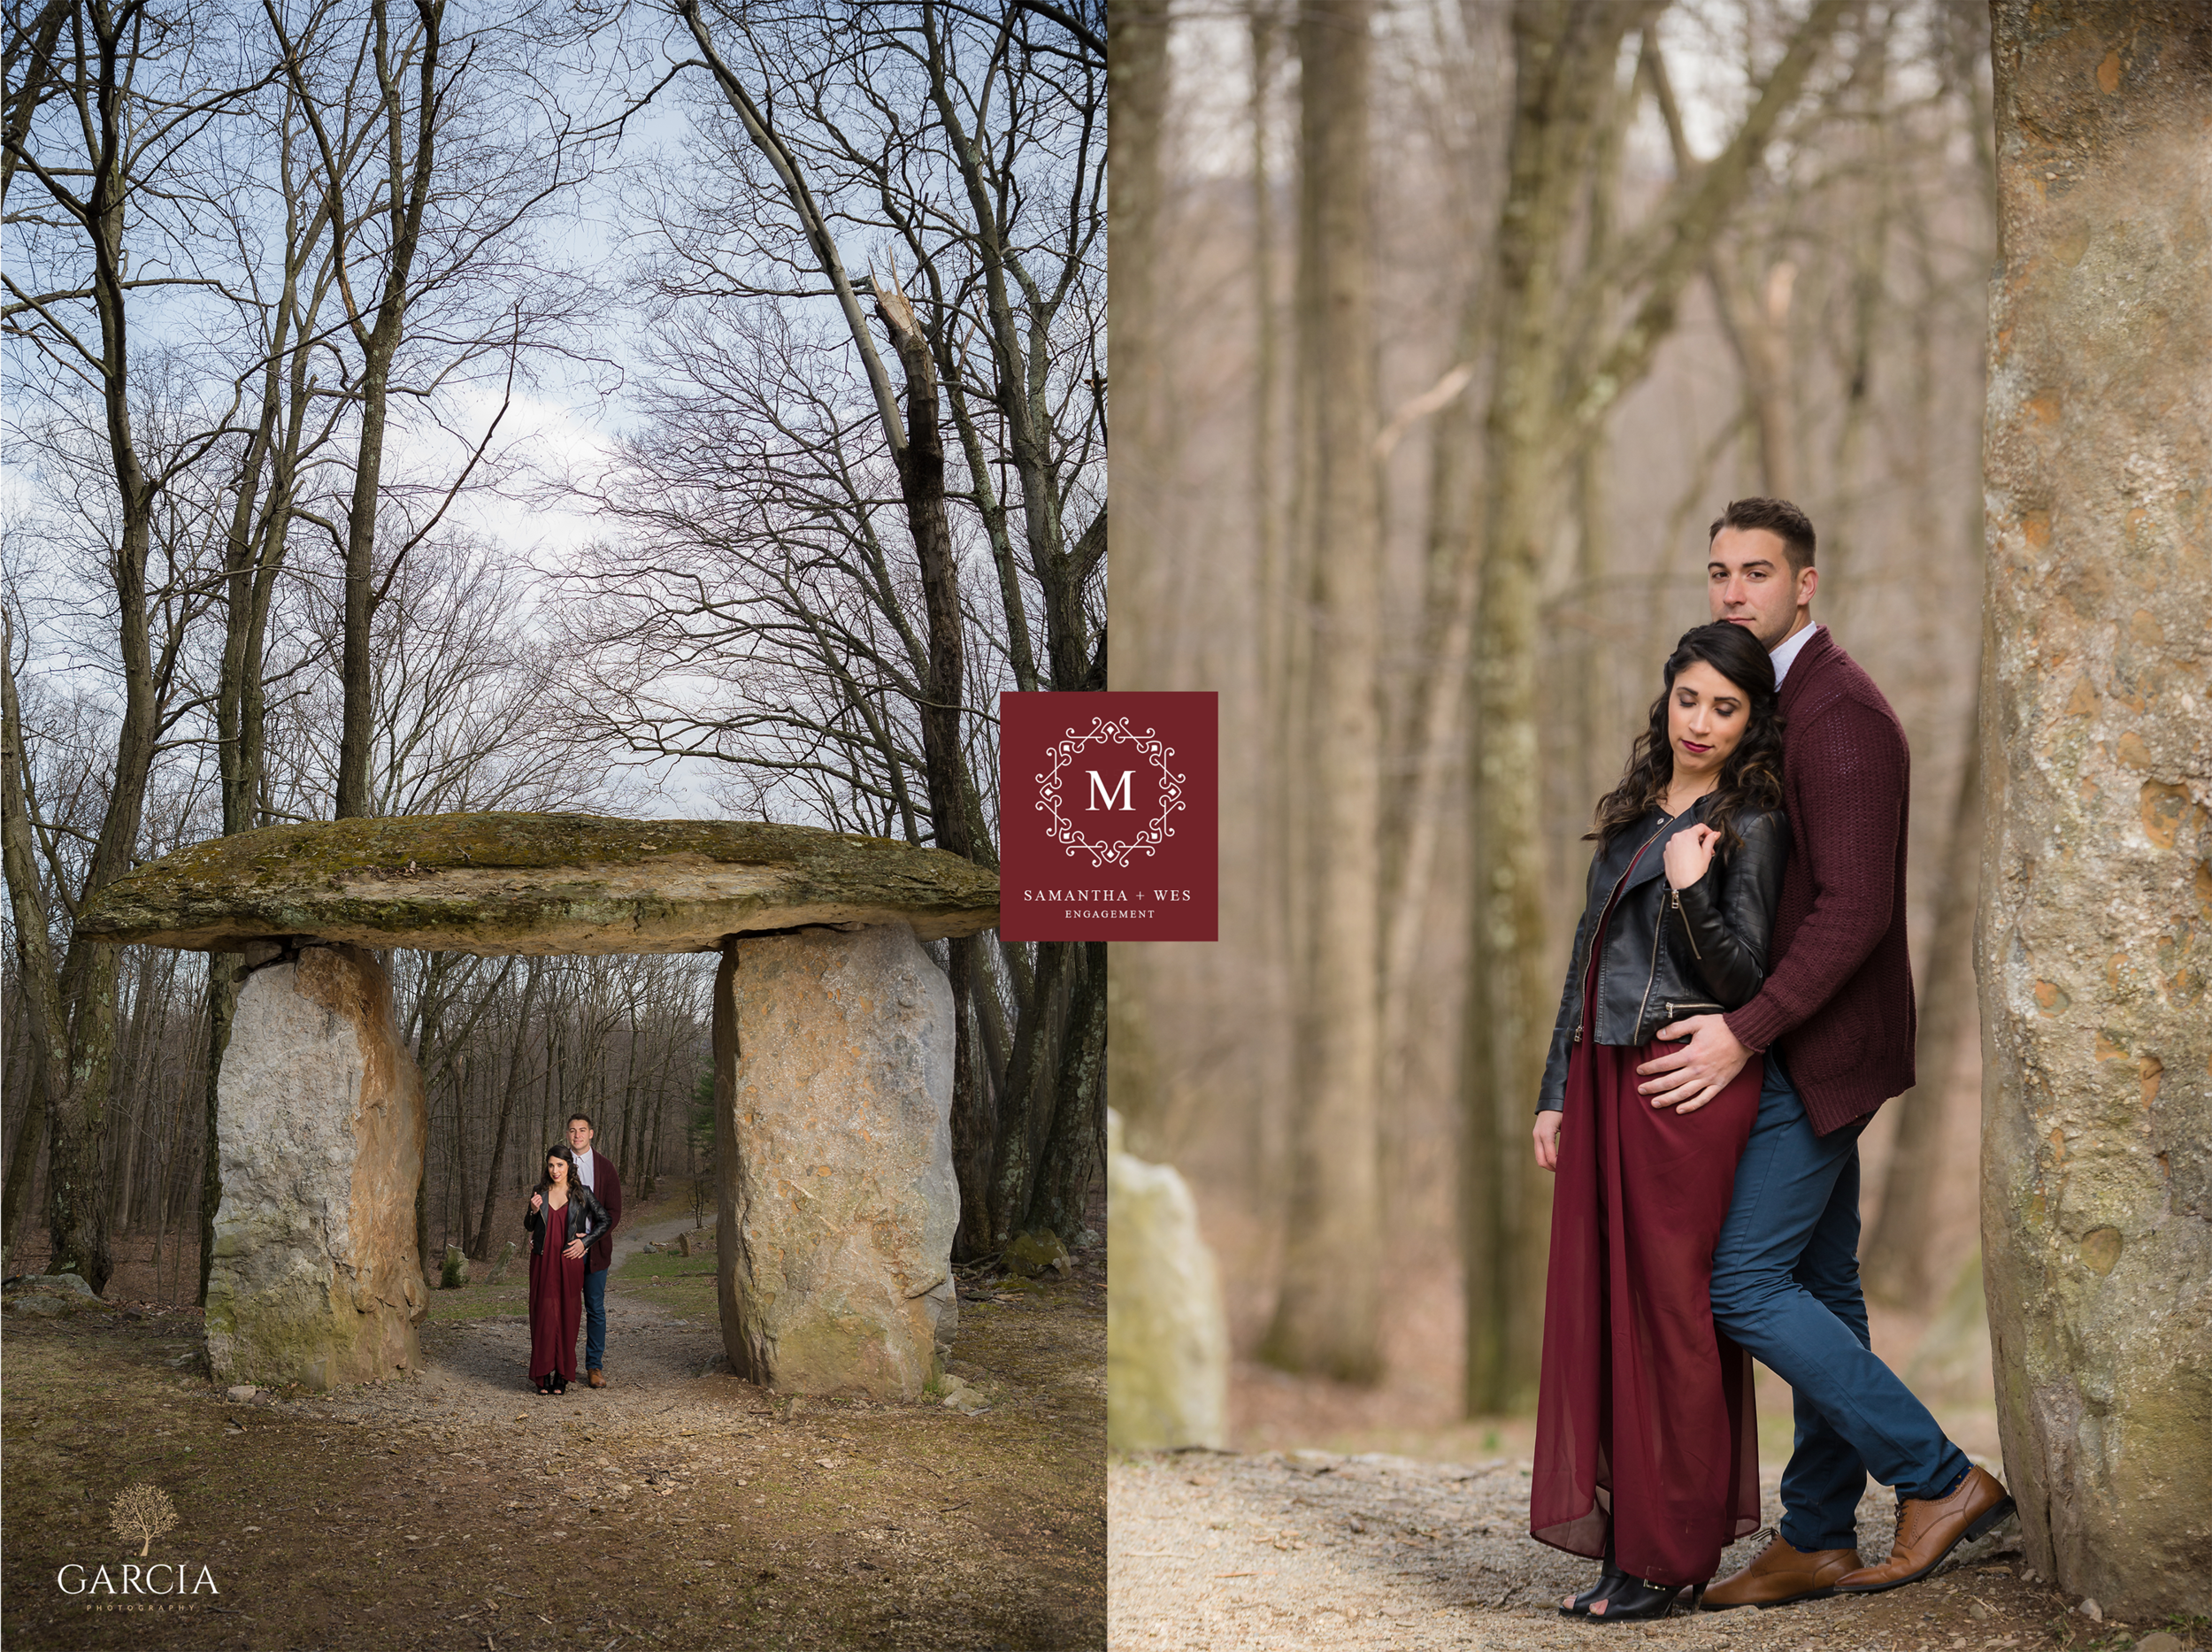 Garcia-Photography-Engagement-Session-Collage-2.png